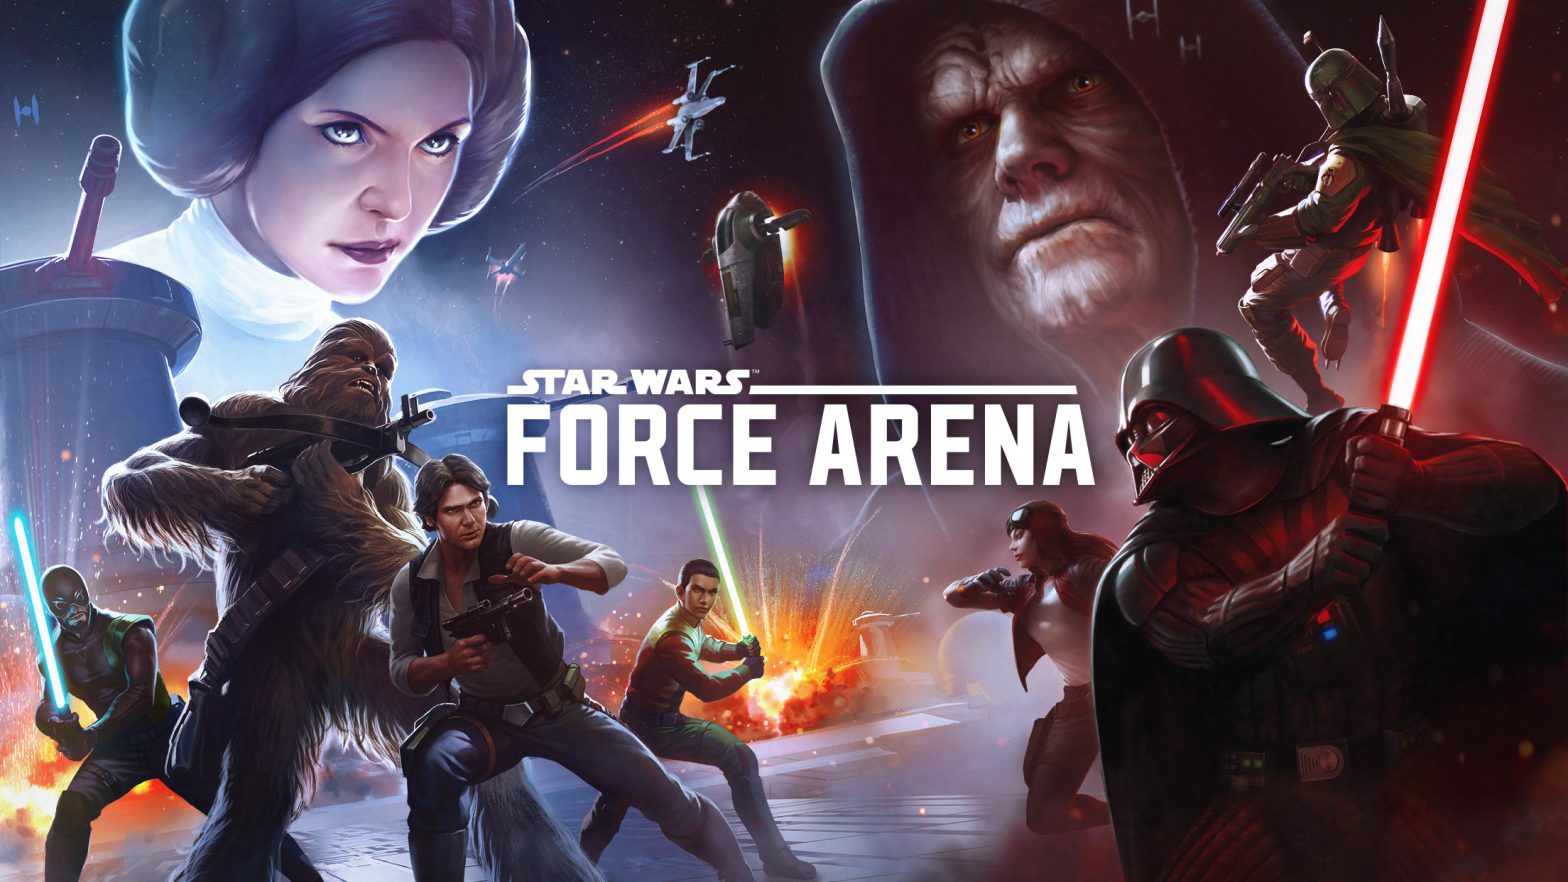 Star Wars: Force Arena for mobile phones